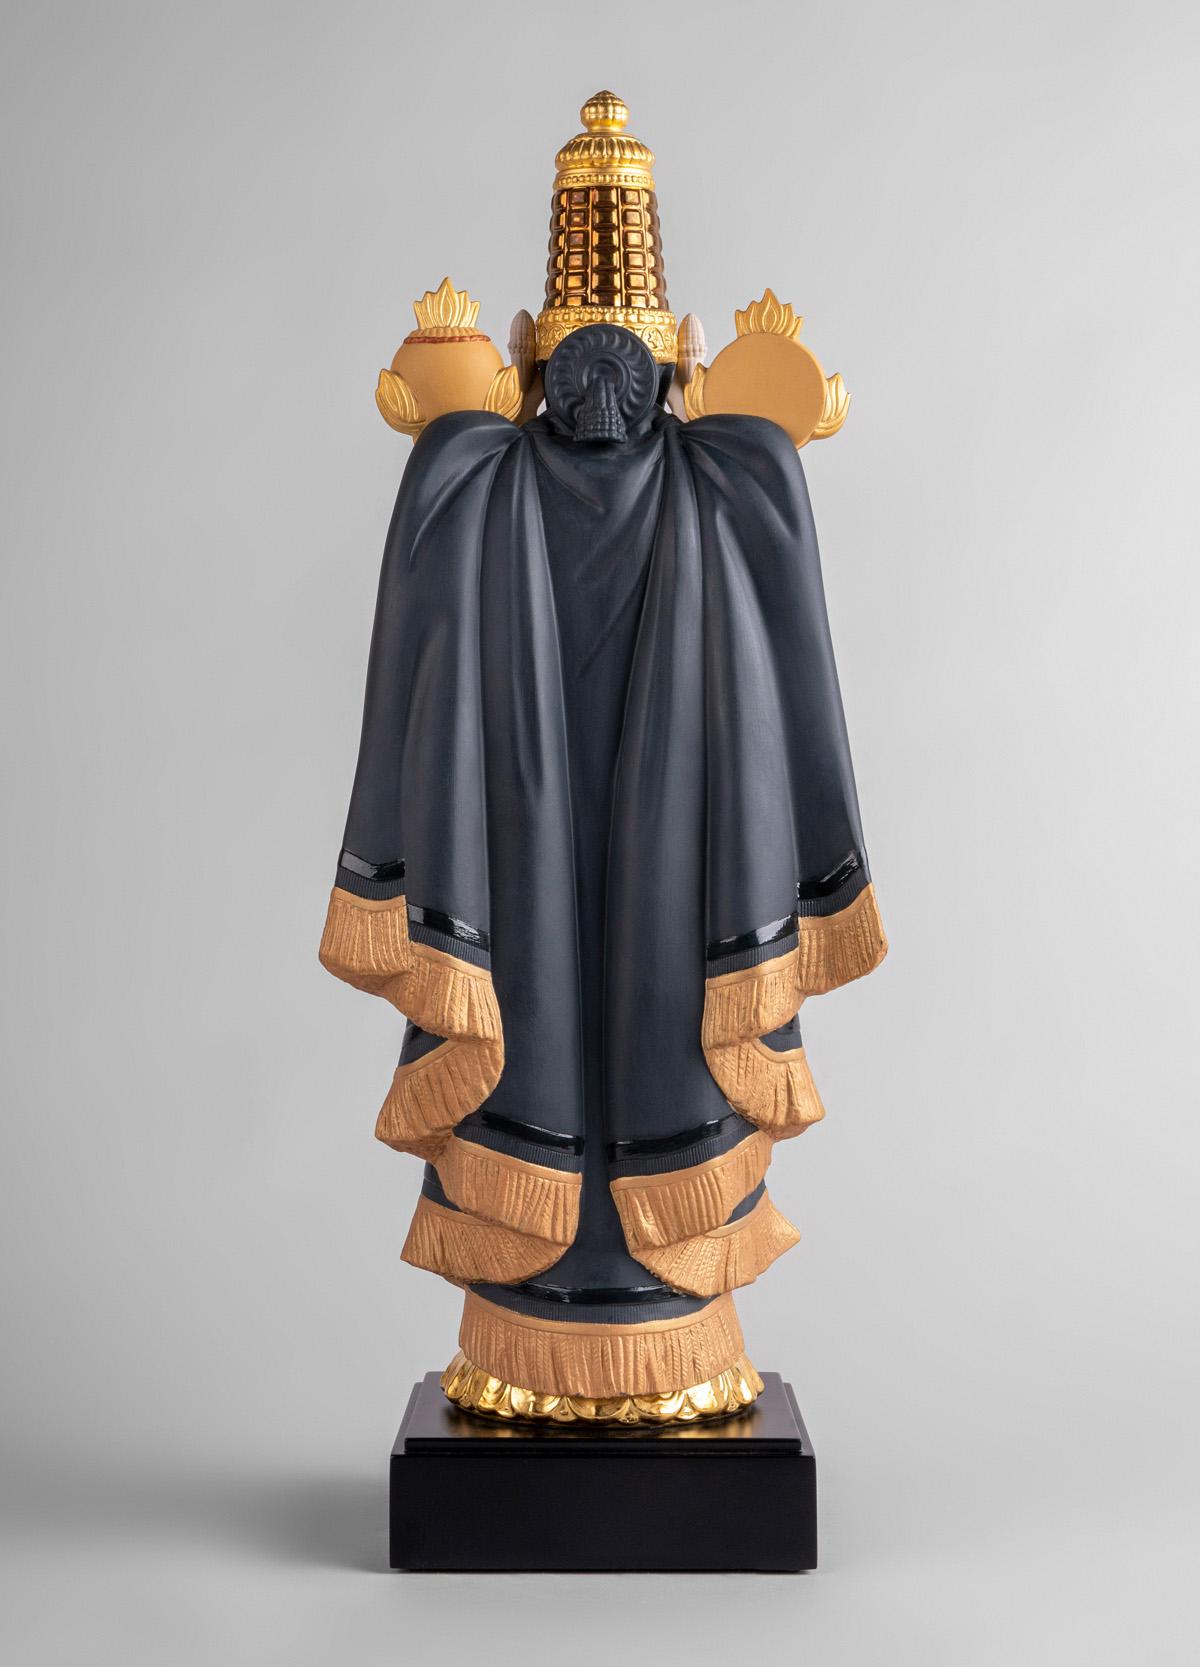 Hand-Crafted Lladró Lord Balaji Sculpture, Limited Edition